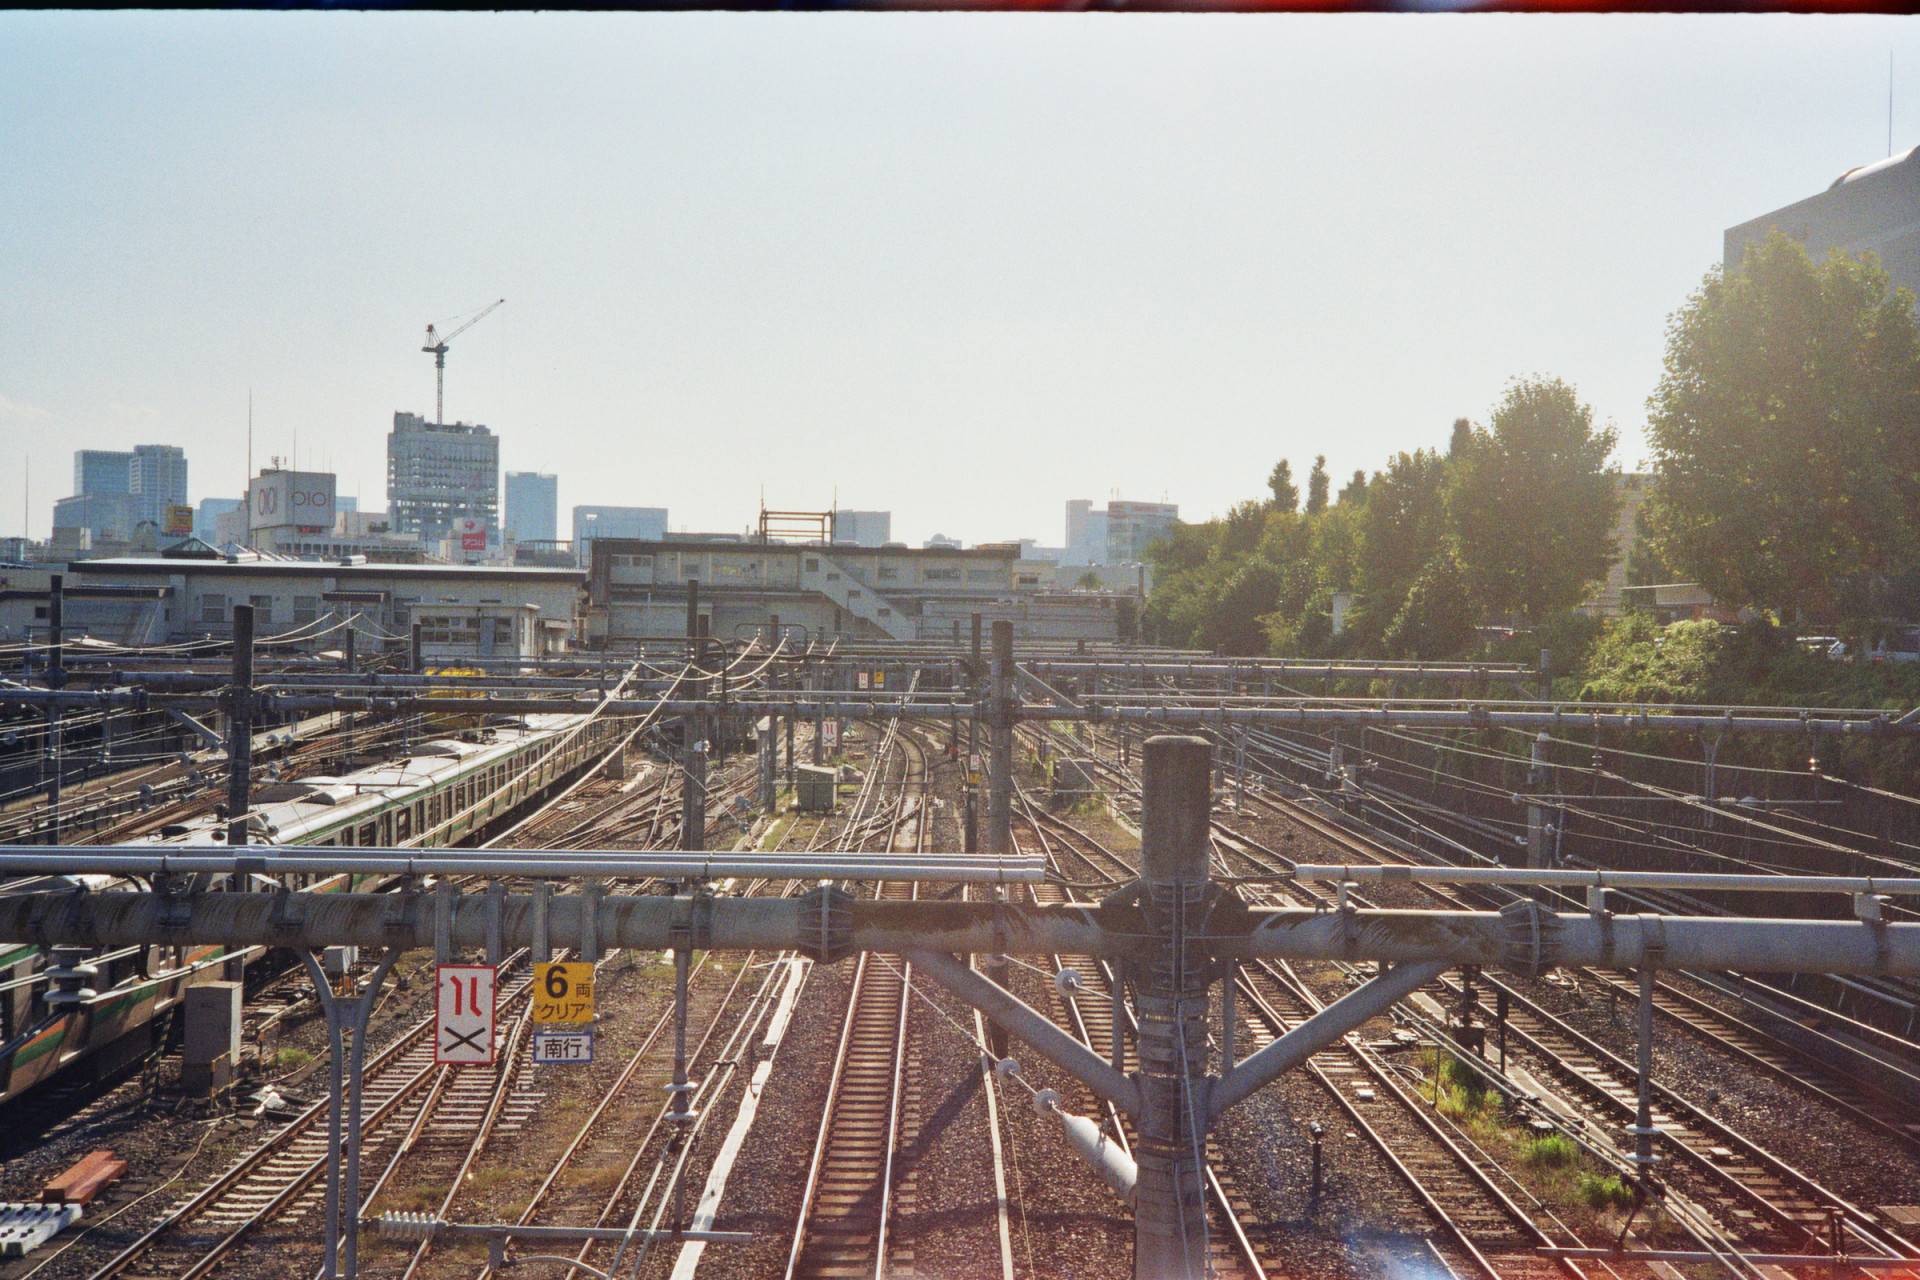 an overview of the train tracks and the pipe network on top of it around the train station shot under the bright open sky